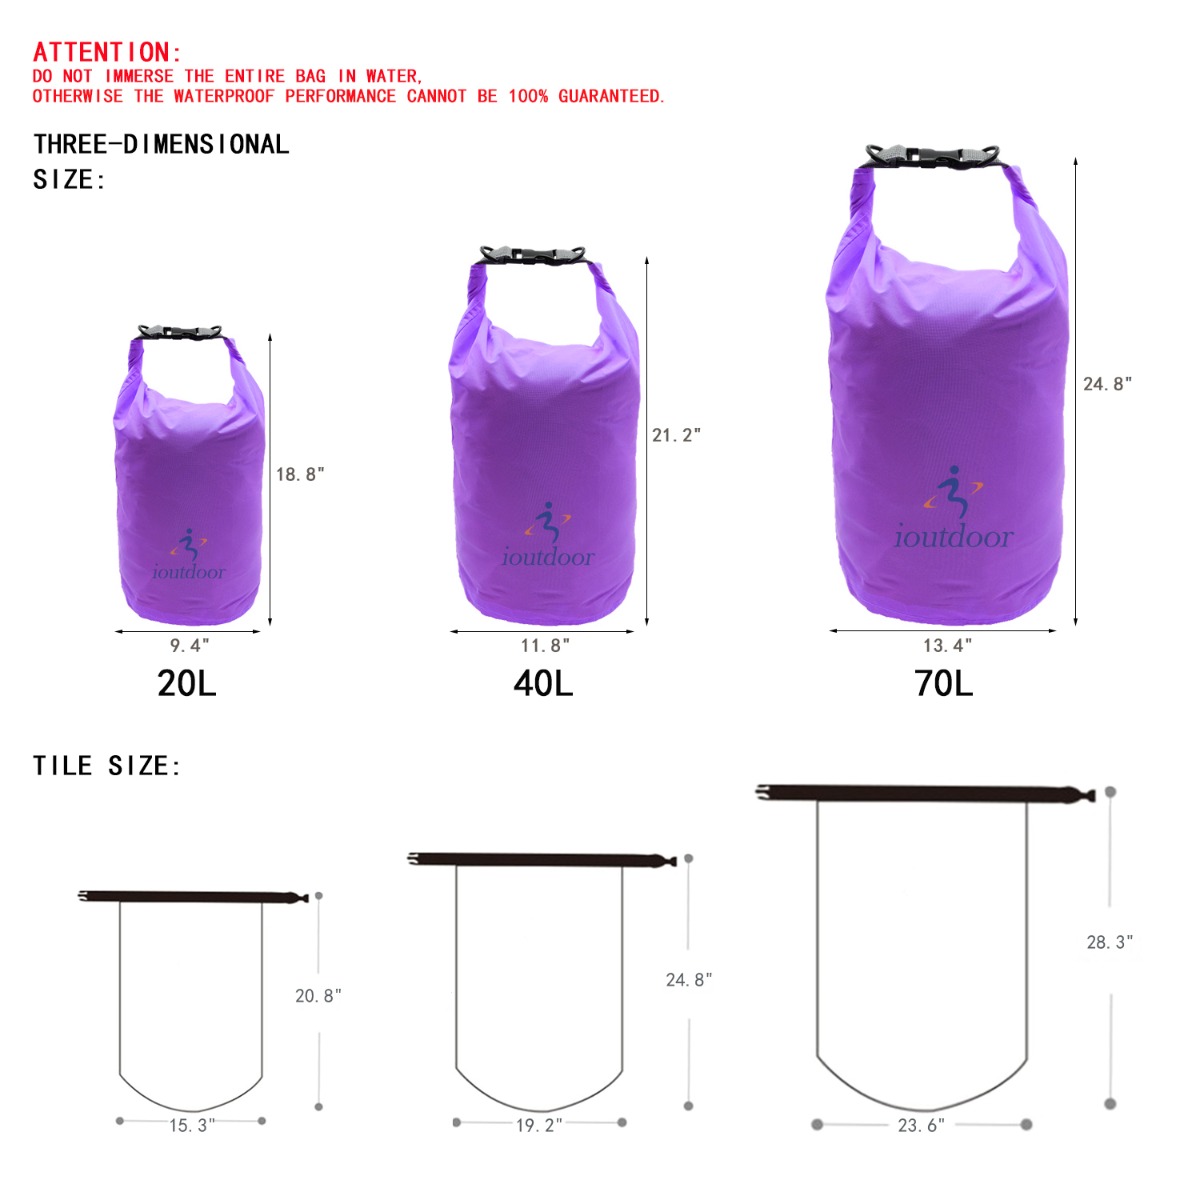 PVC Outdoor Foldable Waterproof Barrel Dry Bag Storage Carrying Bags Camping Hiking Beach OUKENS Dry Bag